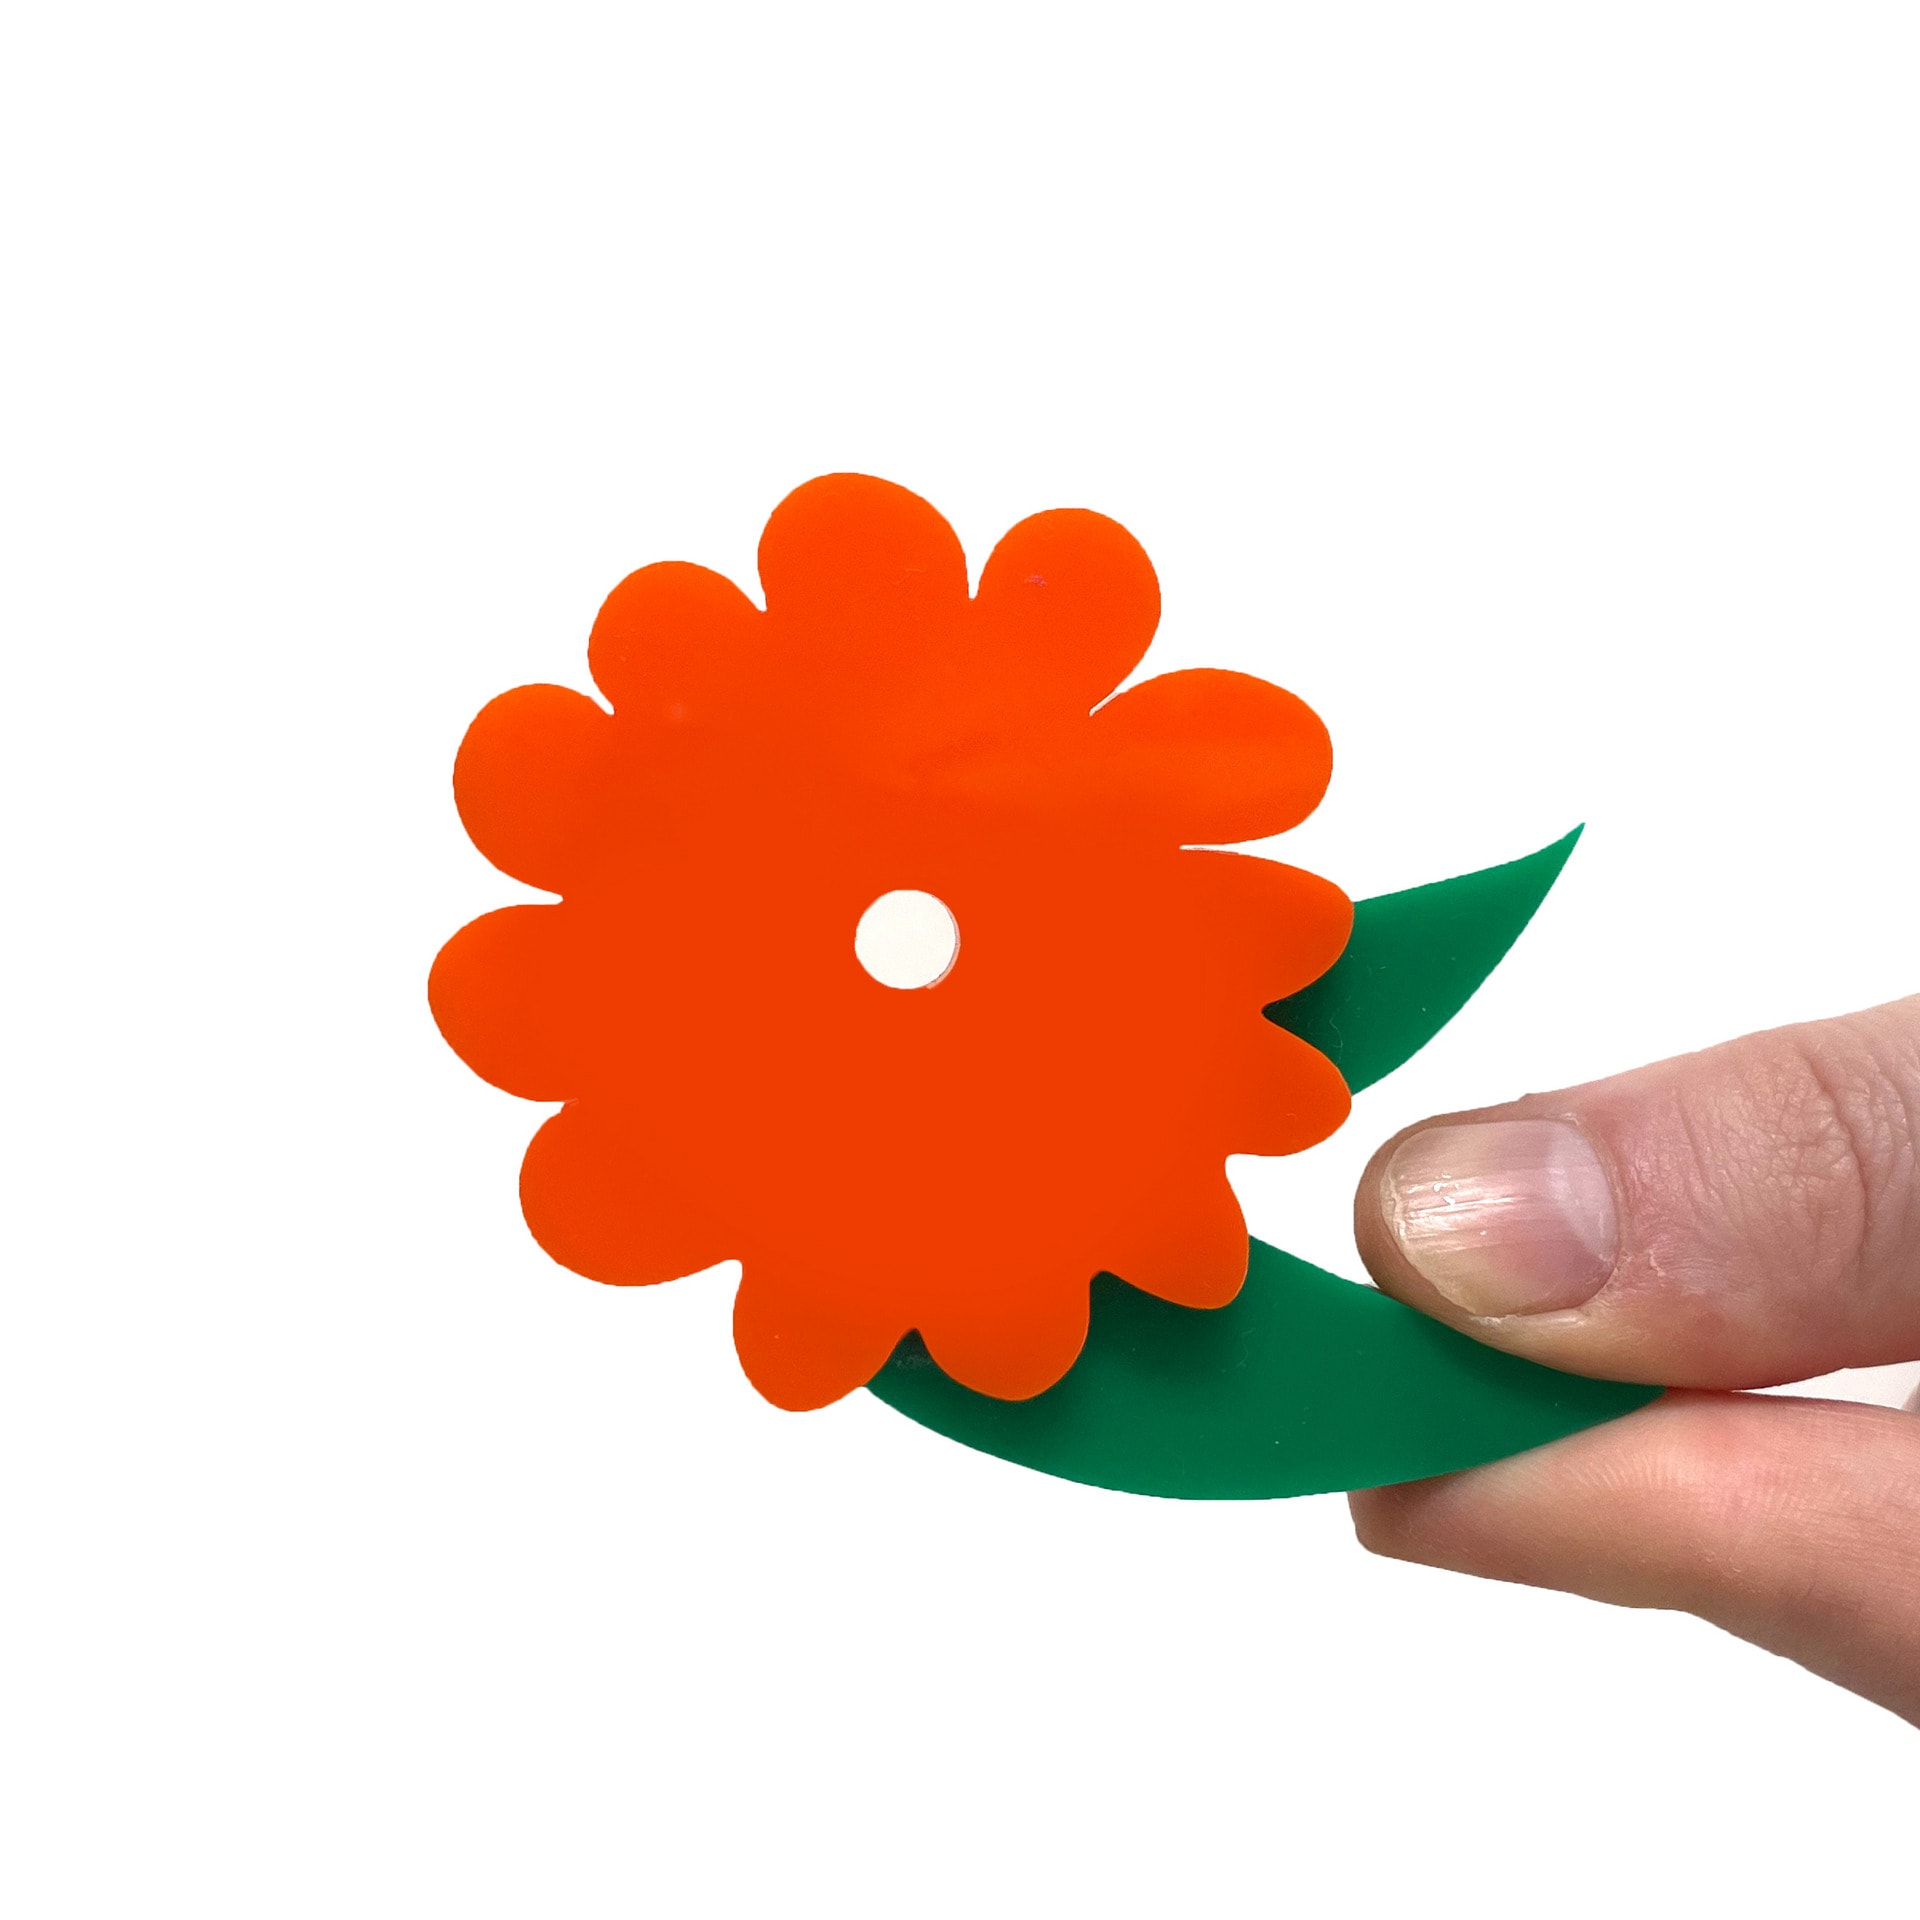 Flower plastic model held between two fingers on a white background. The petals are burnt orange with green leaves.